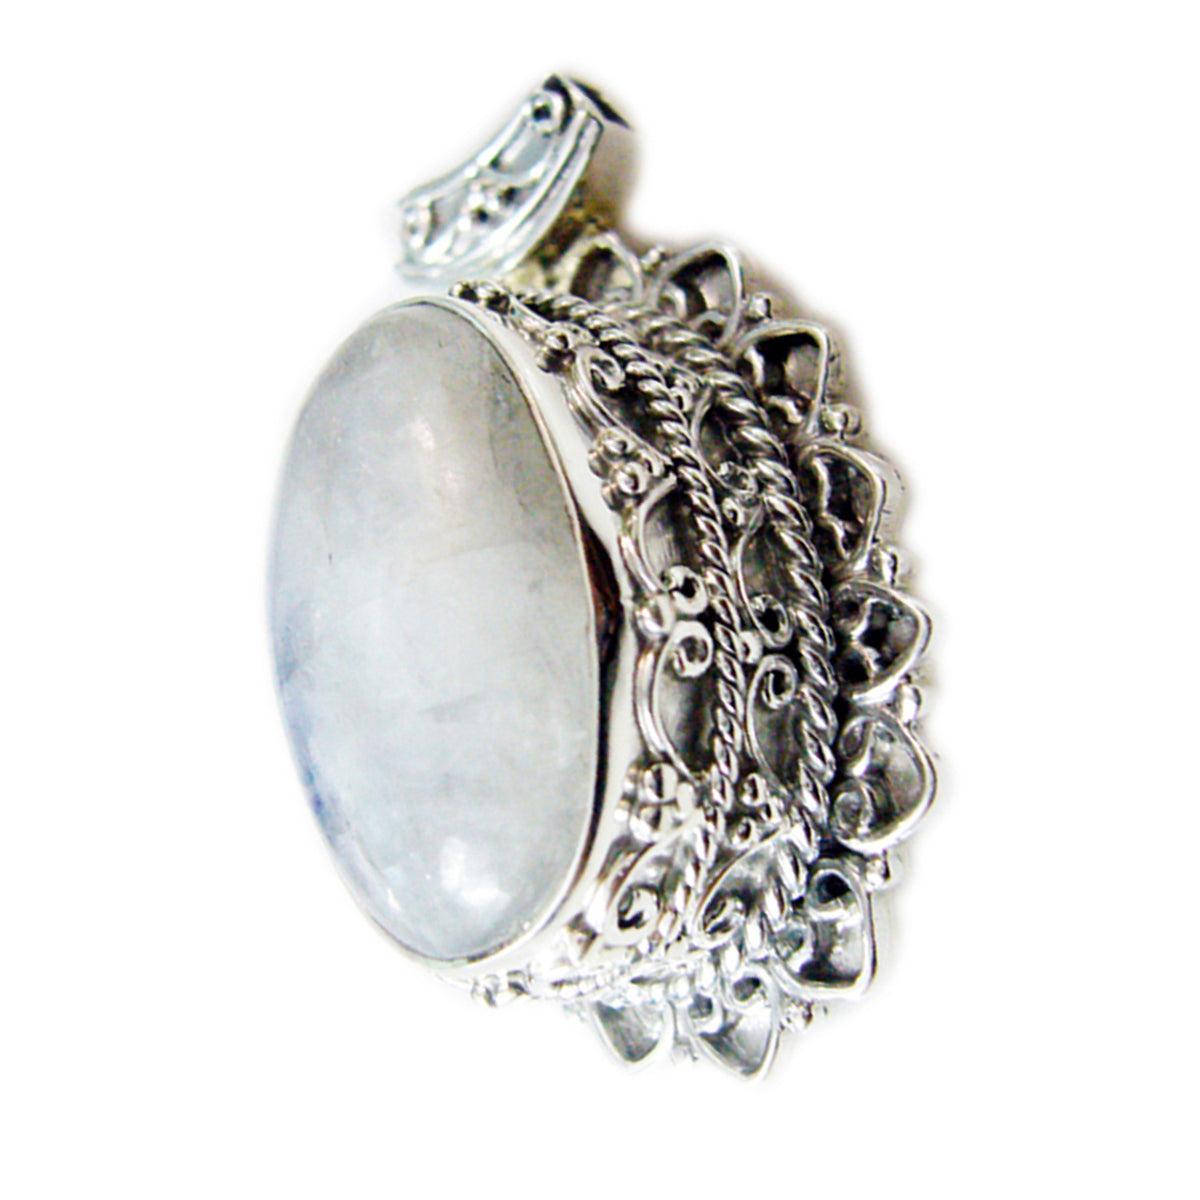 Riyo Beaut Gems Oval Cabochon White Rainbow Moonstone Solid Silver Pendant Gift For Easter Sunday